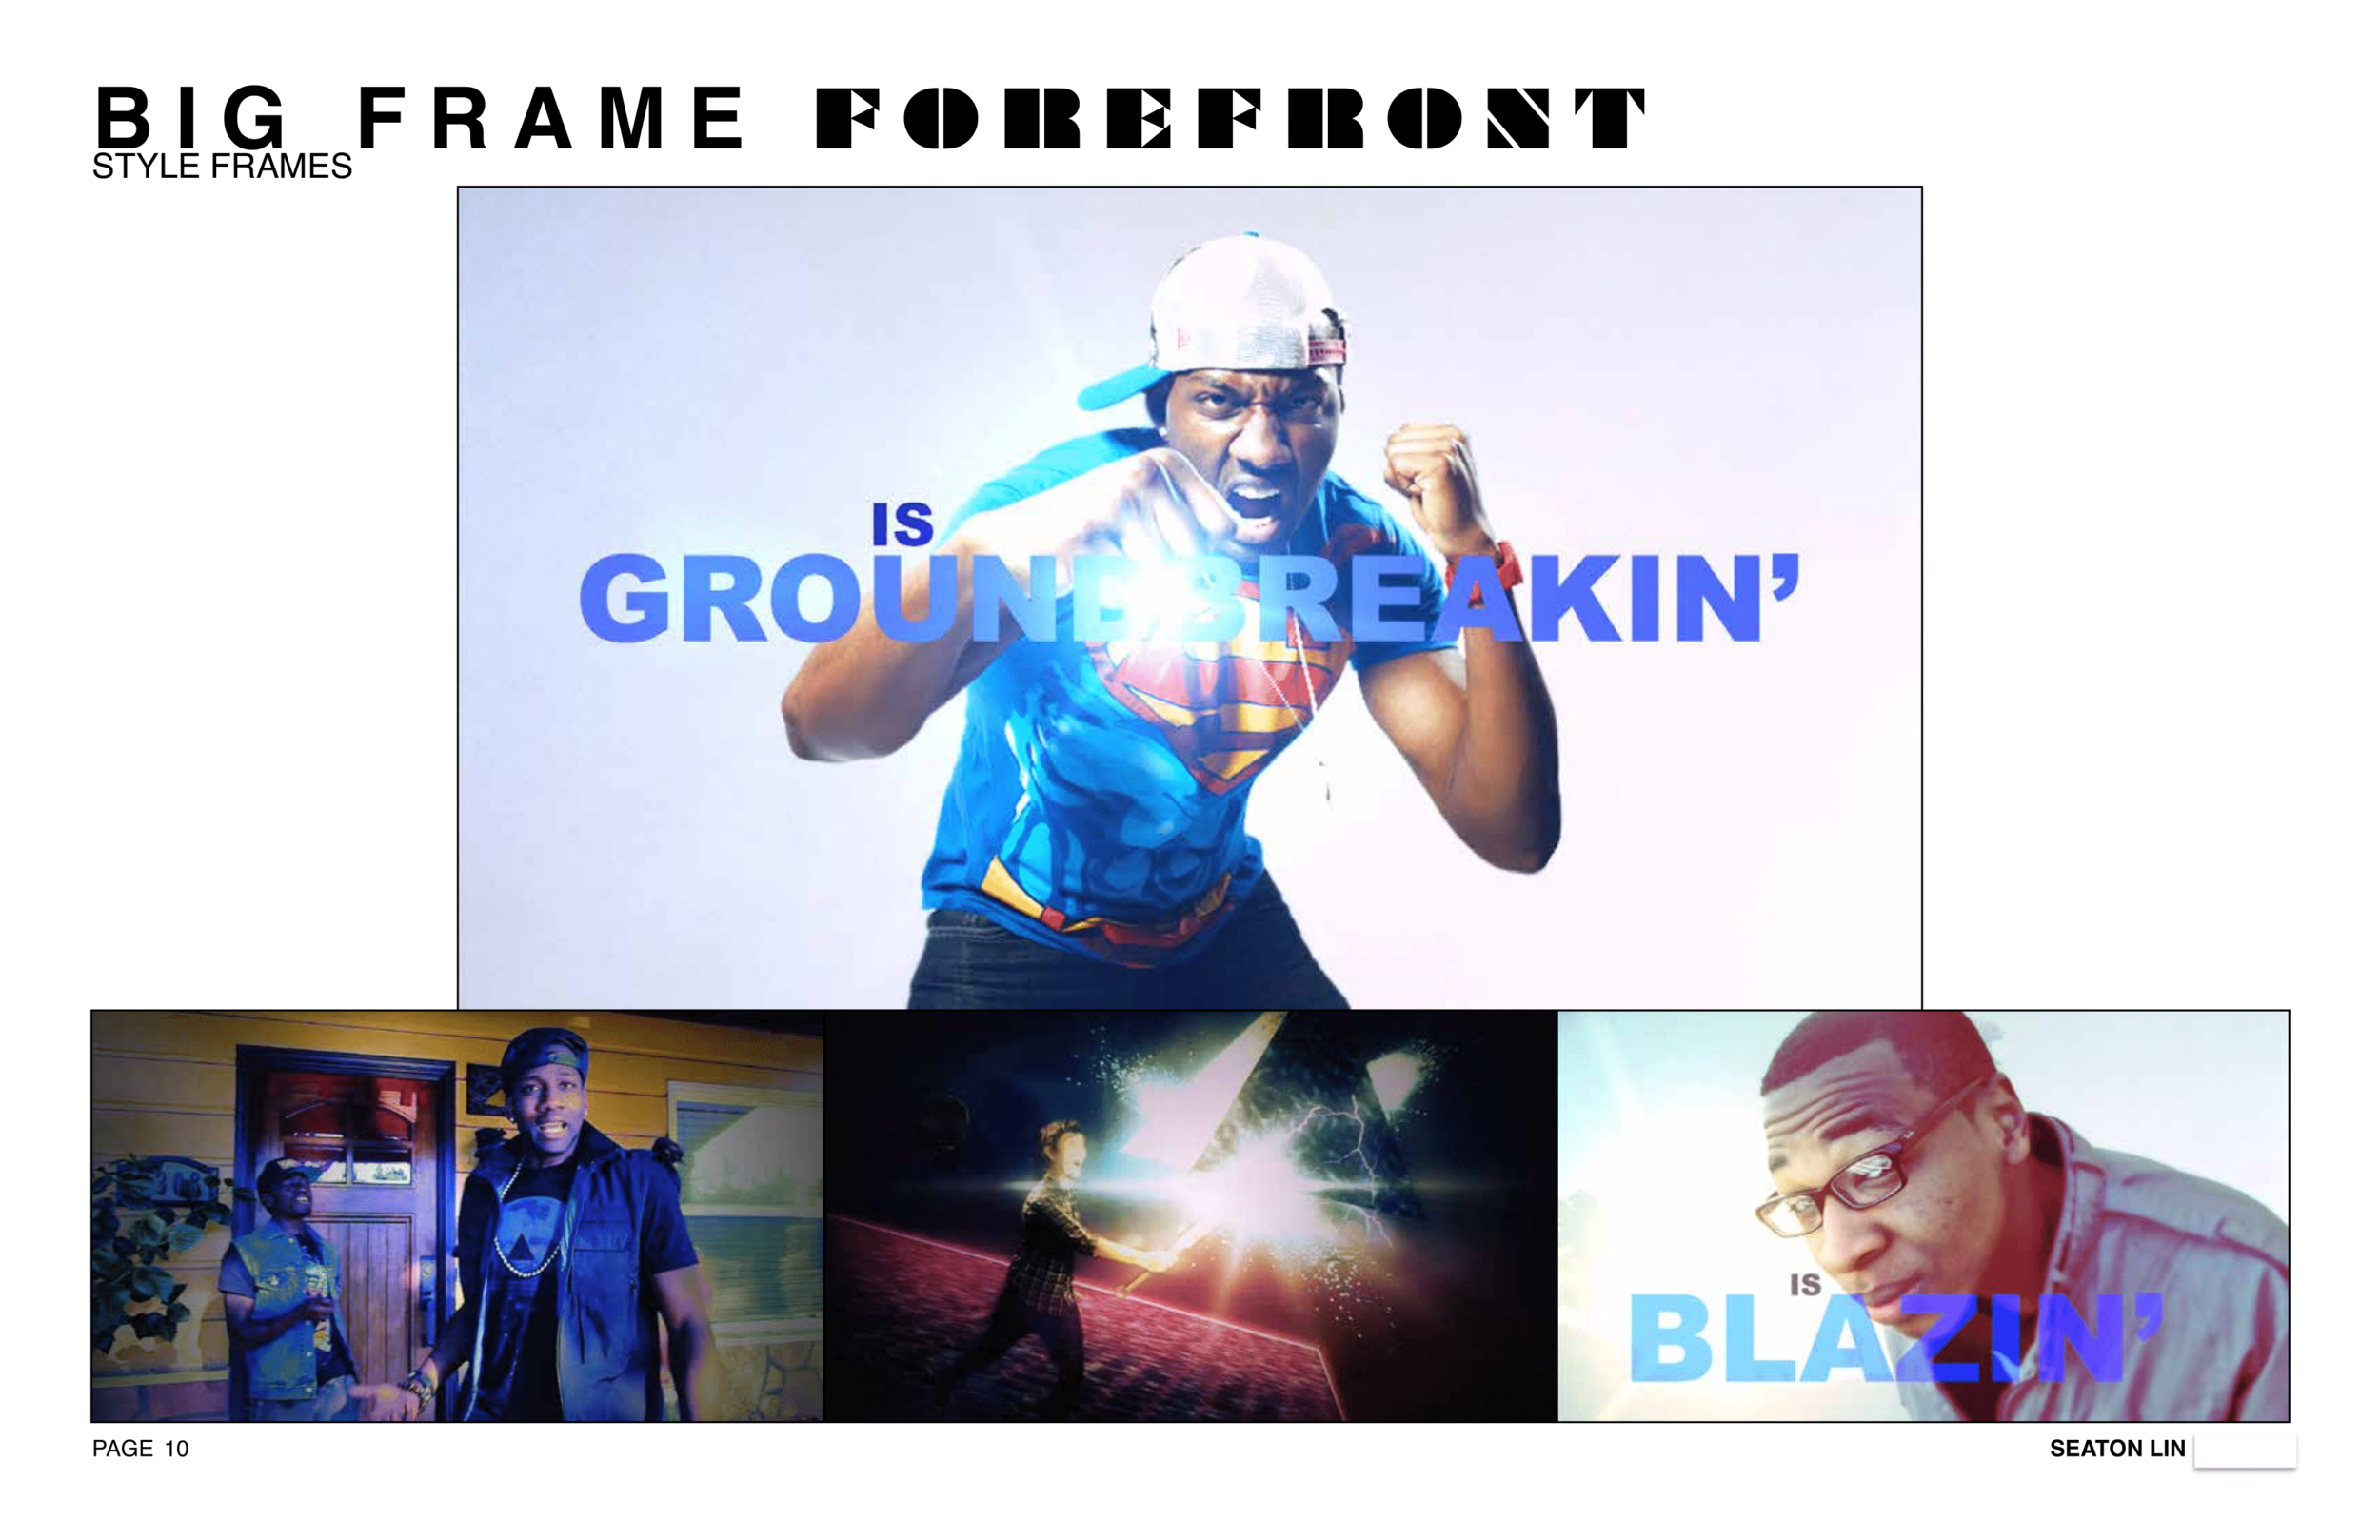 BigFrame_ForeFront_Treatment_SeatonLin-10.png